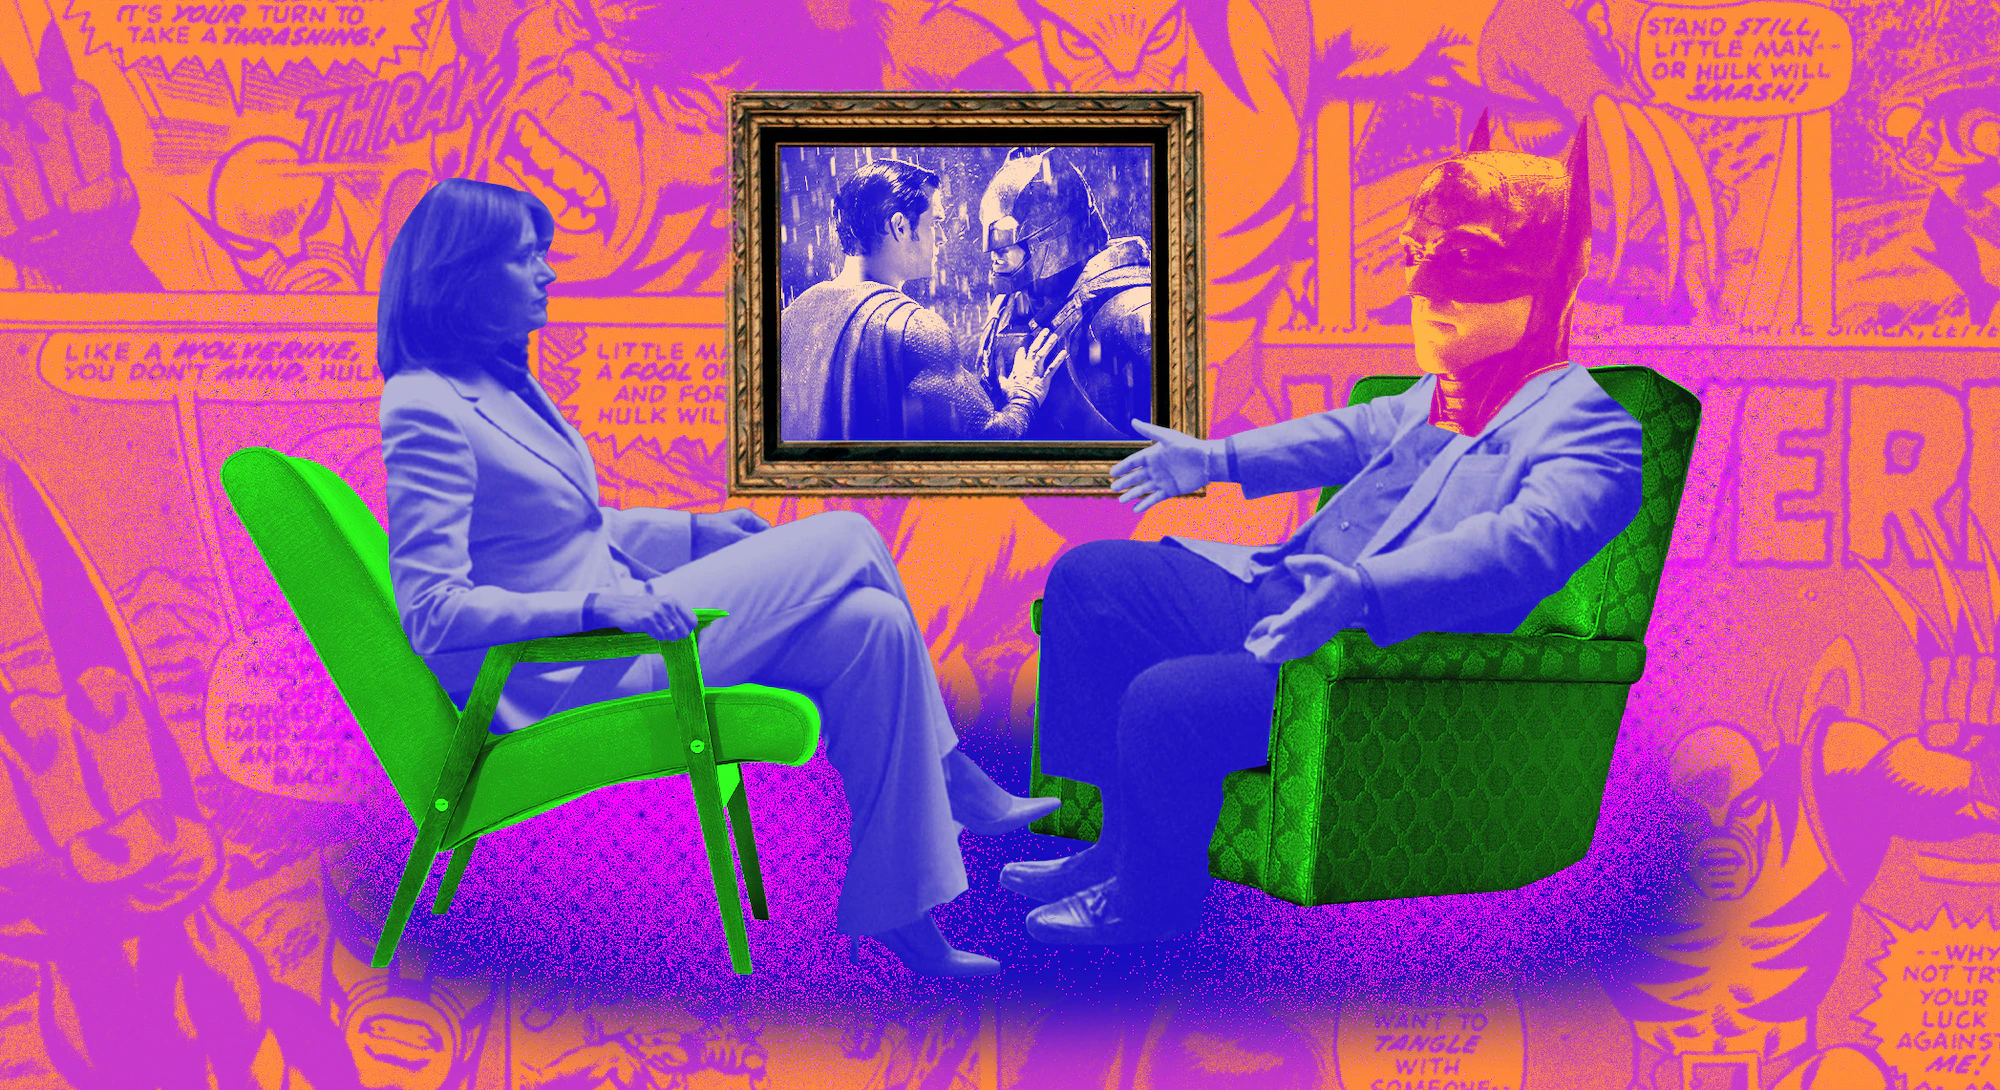 A picture of Batman and Therapist in therapy with a psychedelic colored background